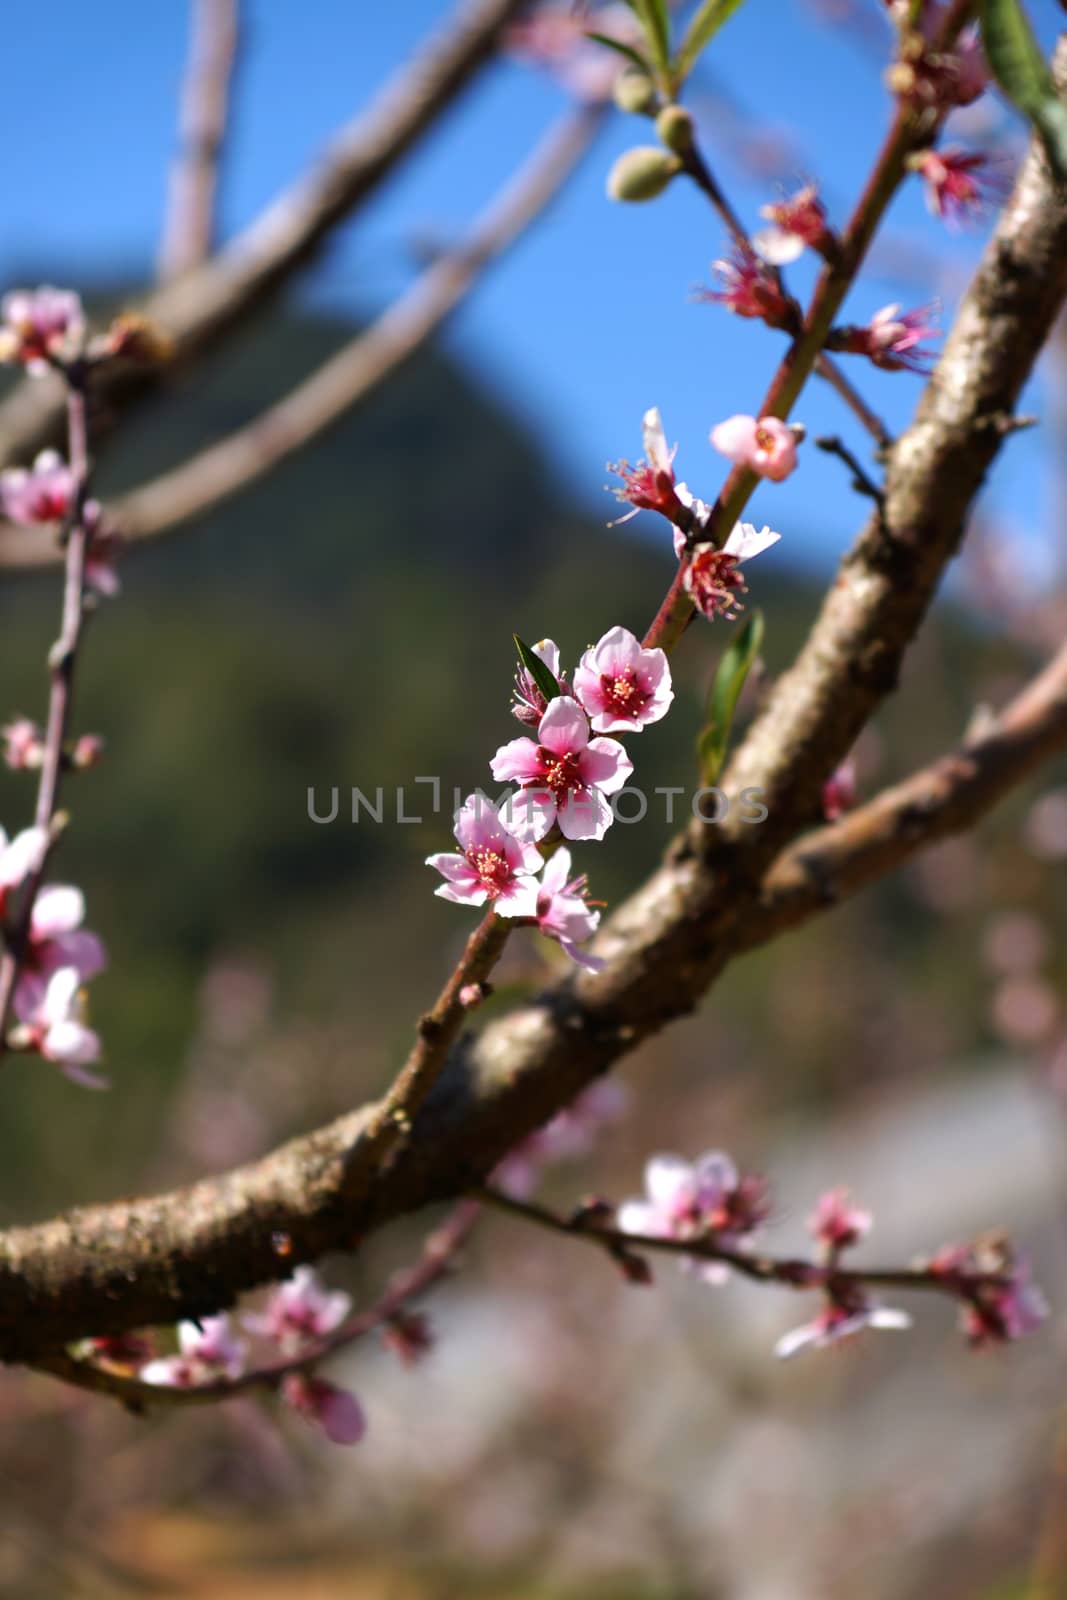 Chinese plum tree, Japanese apricot tree. by Noppharat_th